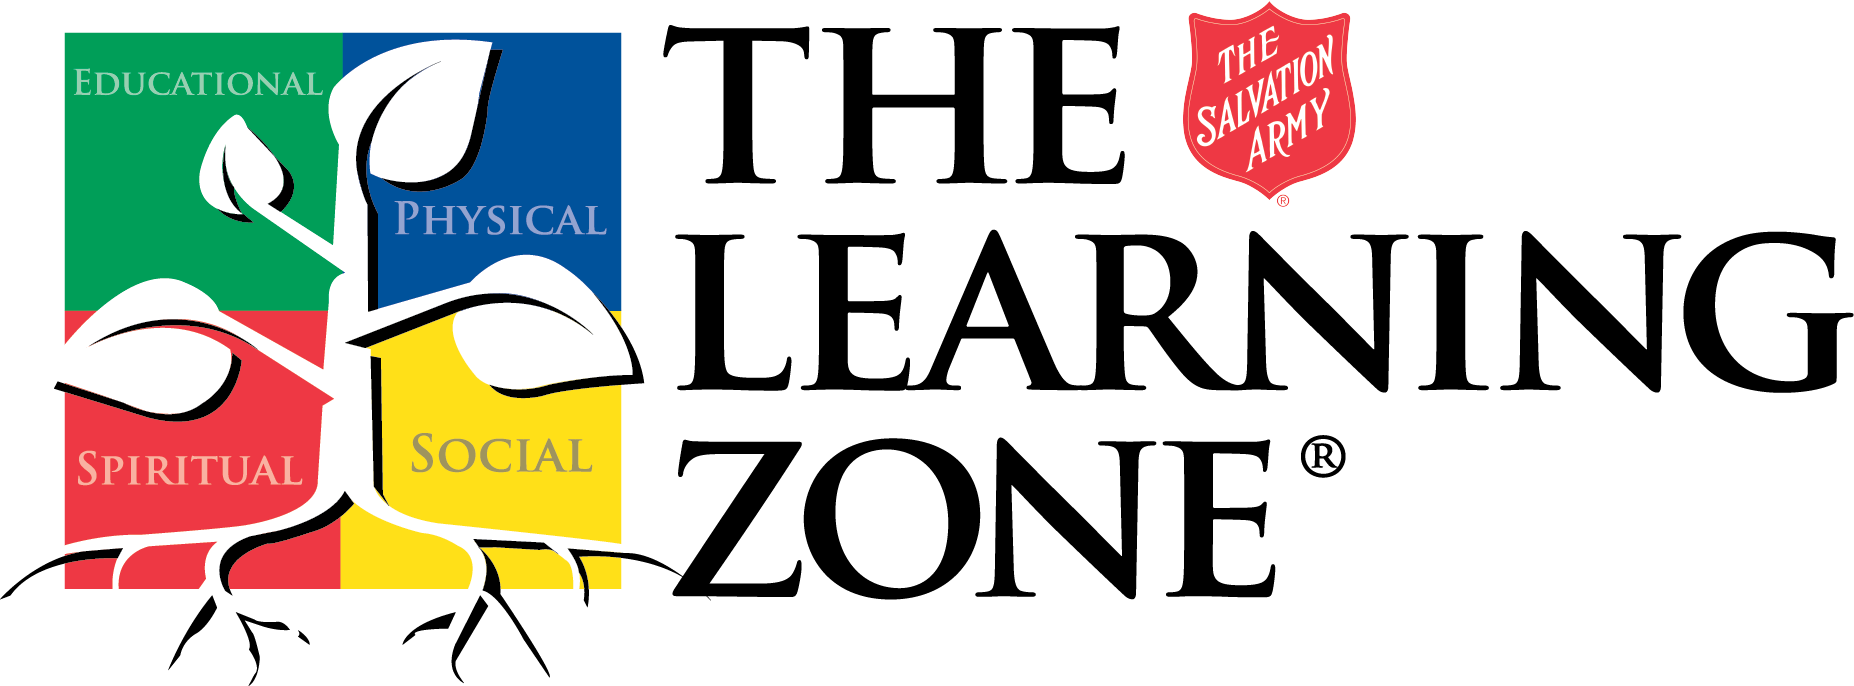 SALVATION ARMY LEARNING ZONE PRESCHOOL & CHILD CARE